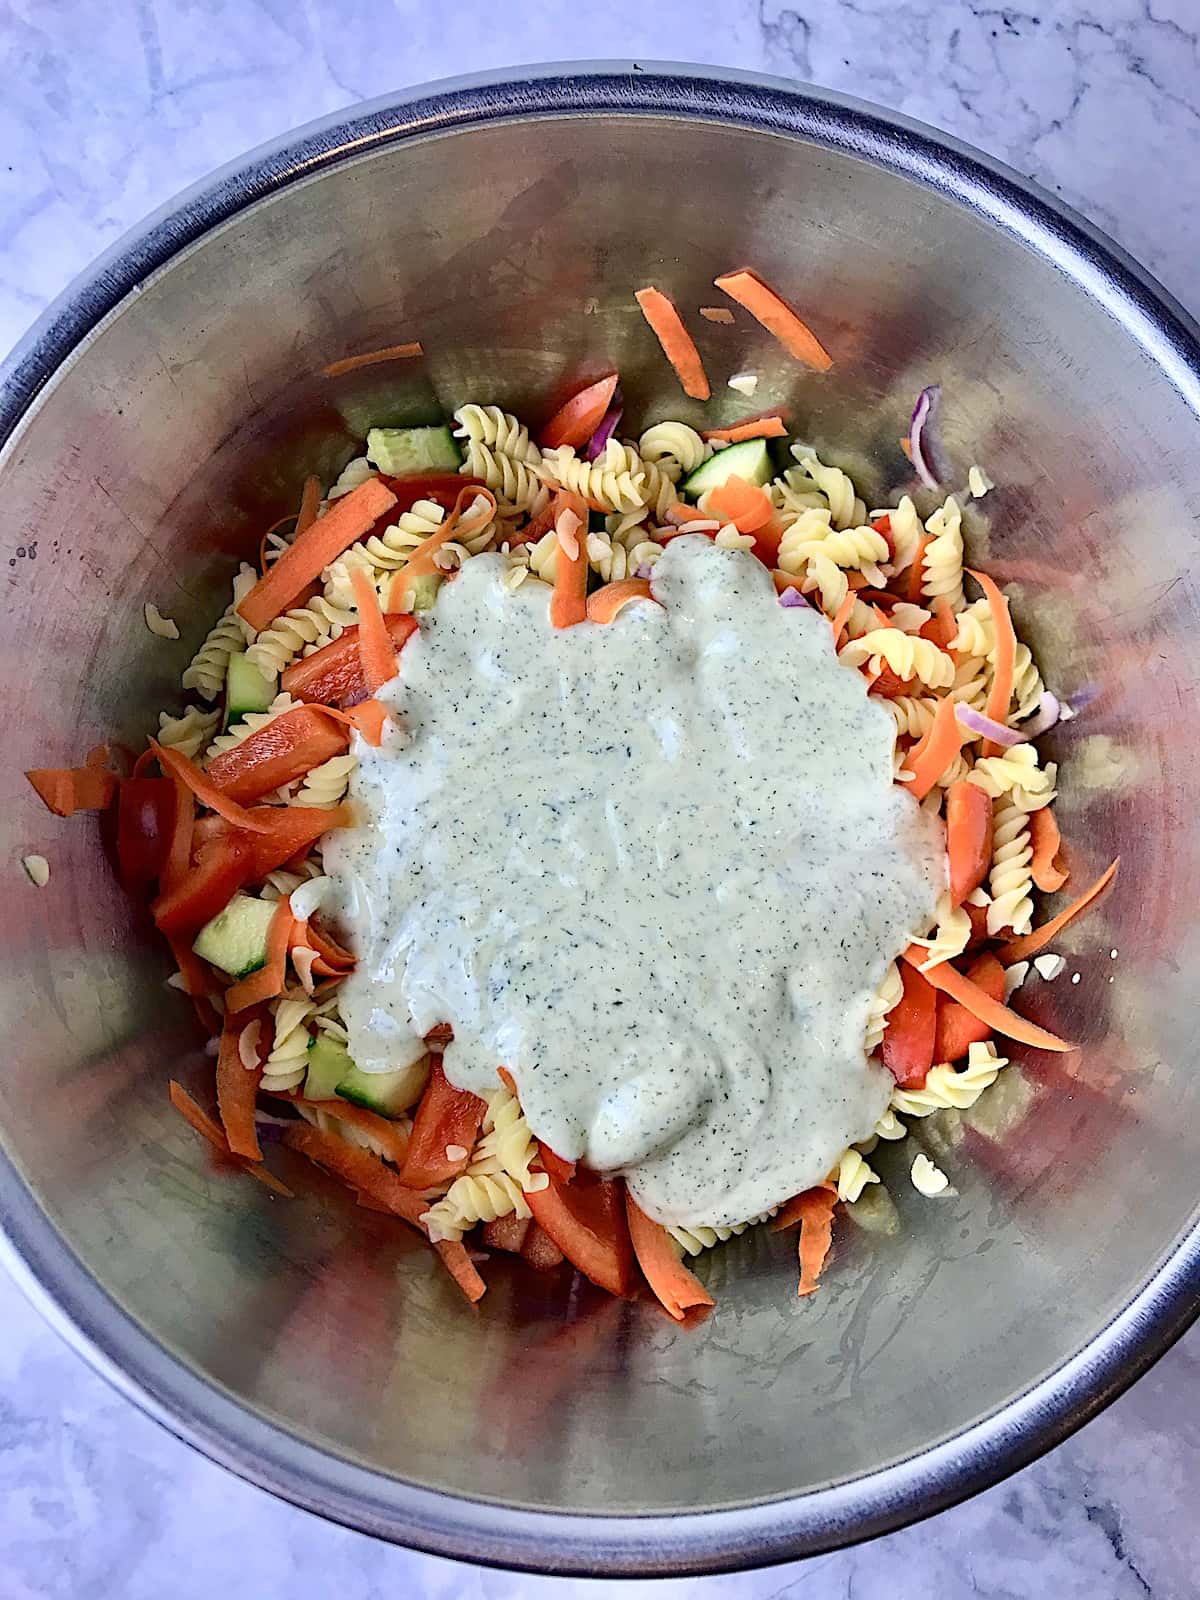 A bowl of pasta salad with hummus dressing poured on it.